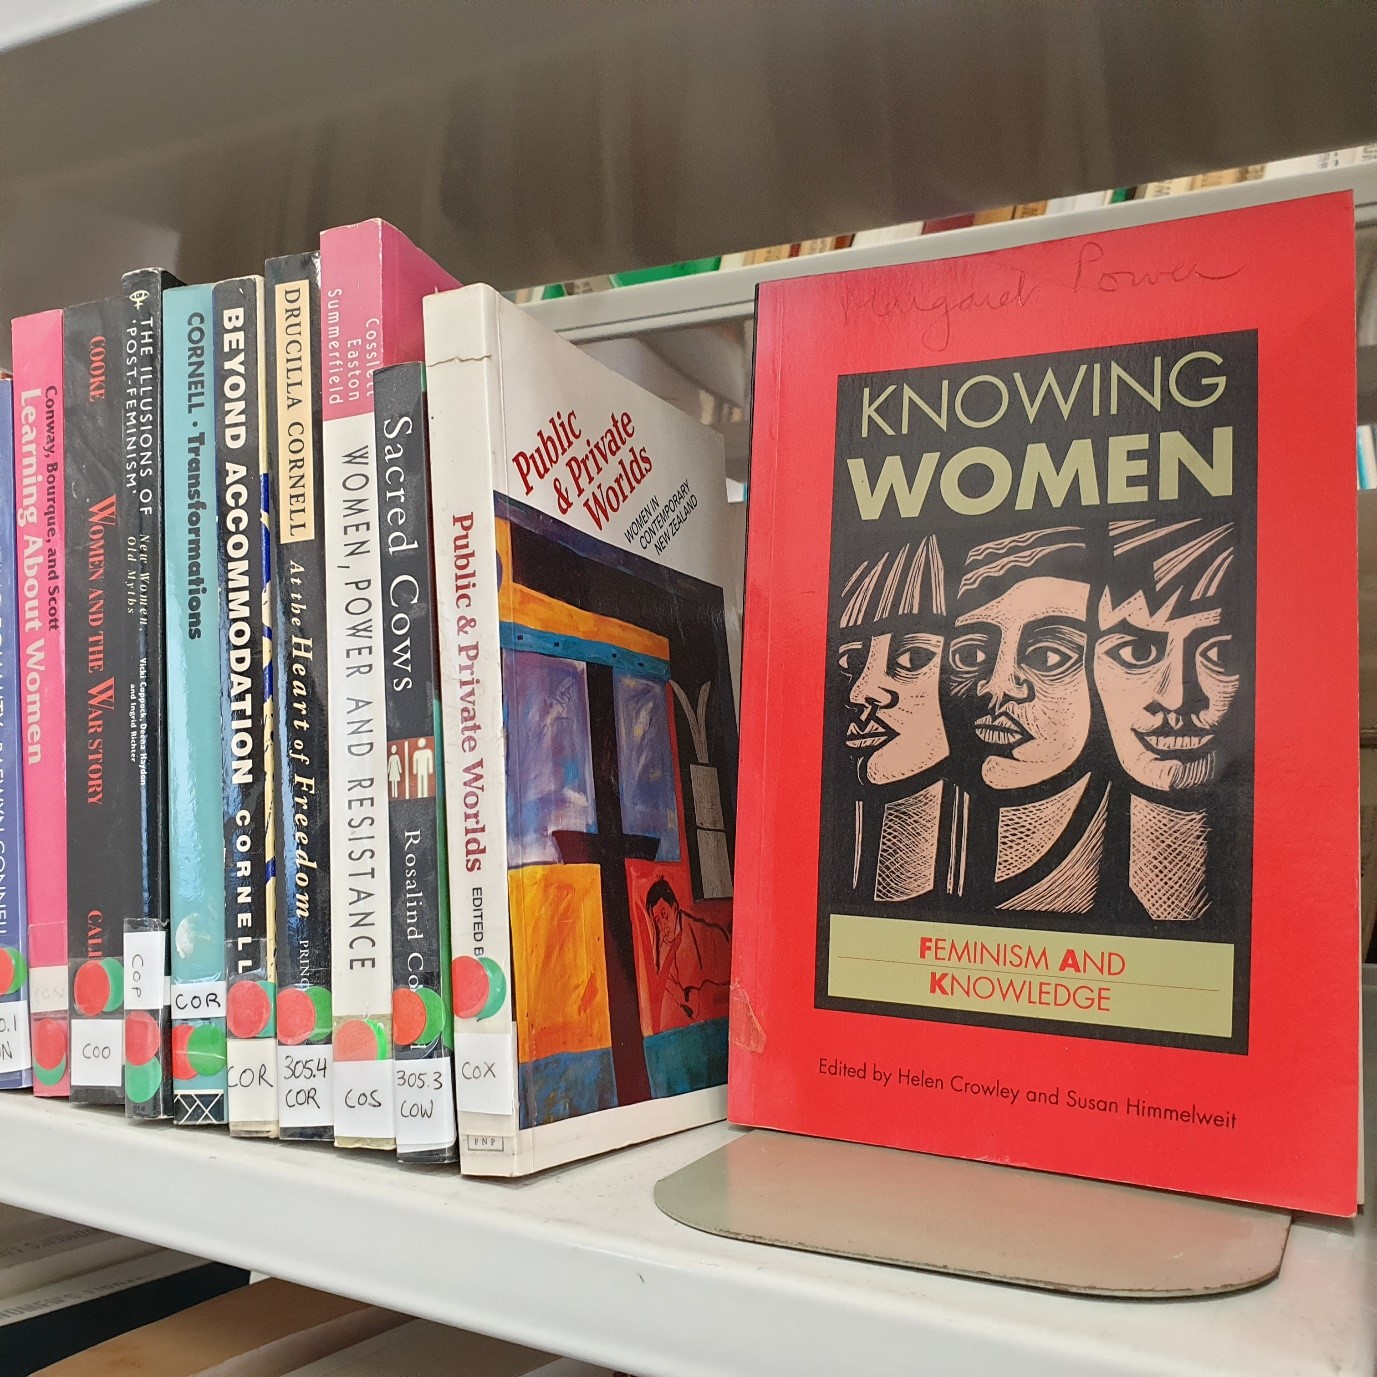 The Feminist Theory section